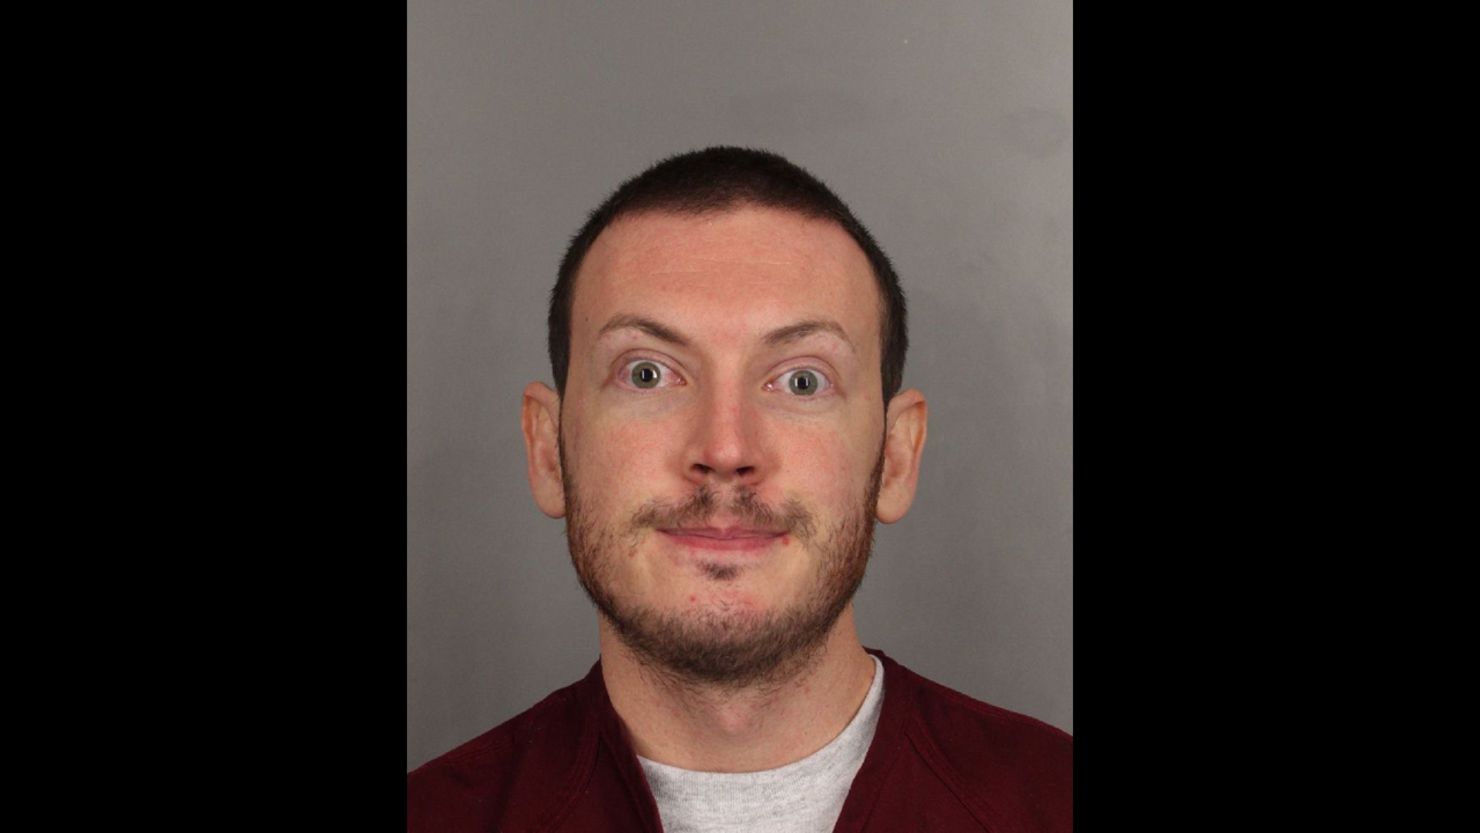 James Holmes is accused of killing 12 people in a July 2012 attack in an Aurora, Colorado, movie theater.